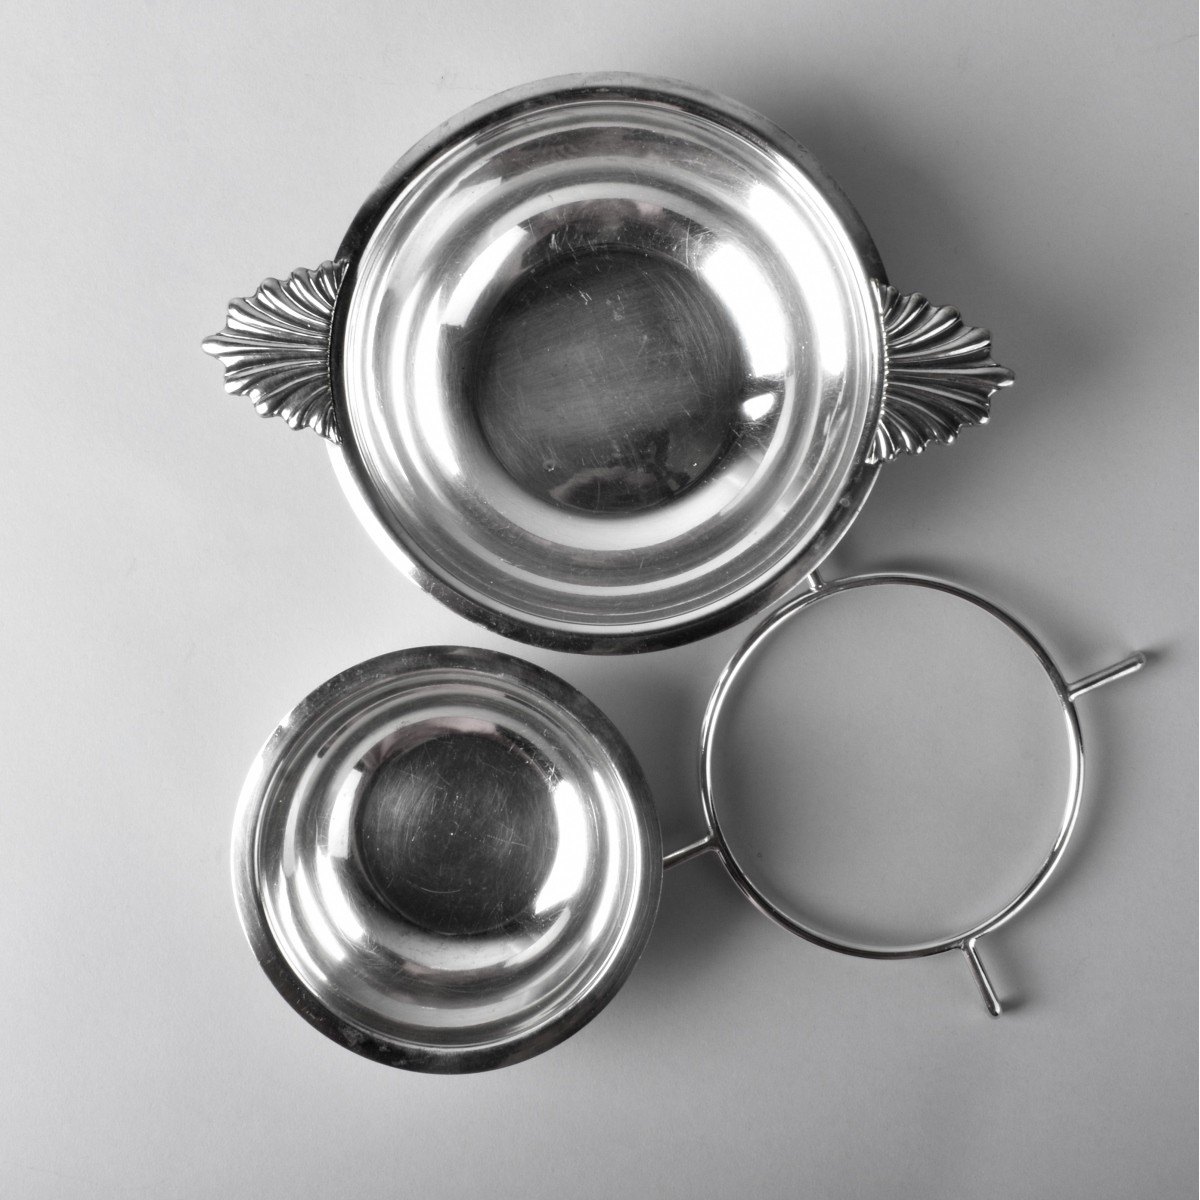 Grouping of Two Silverplated Tableware